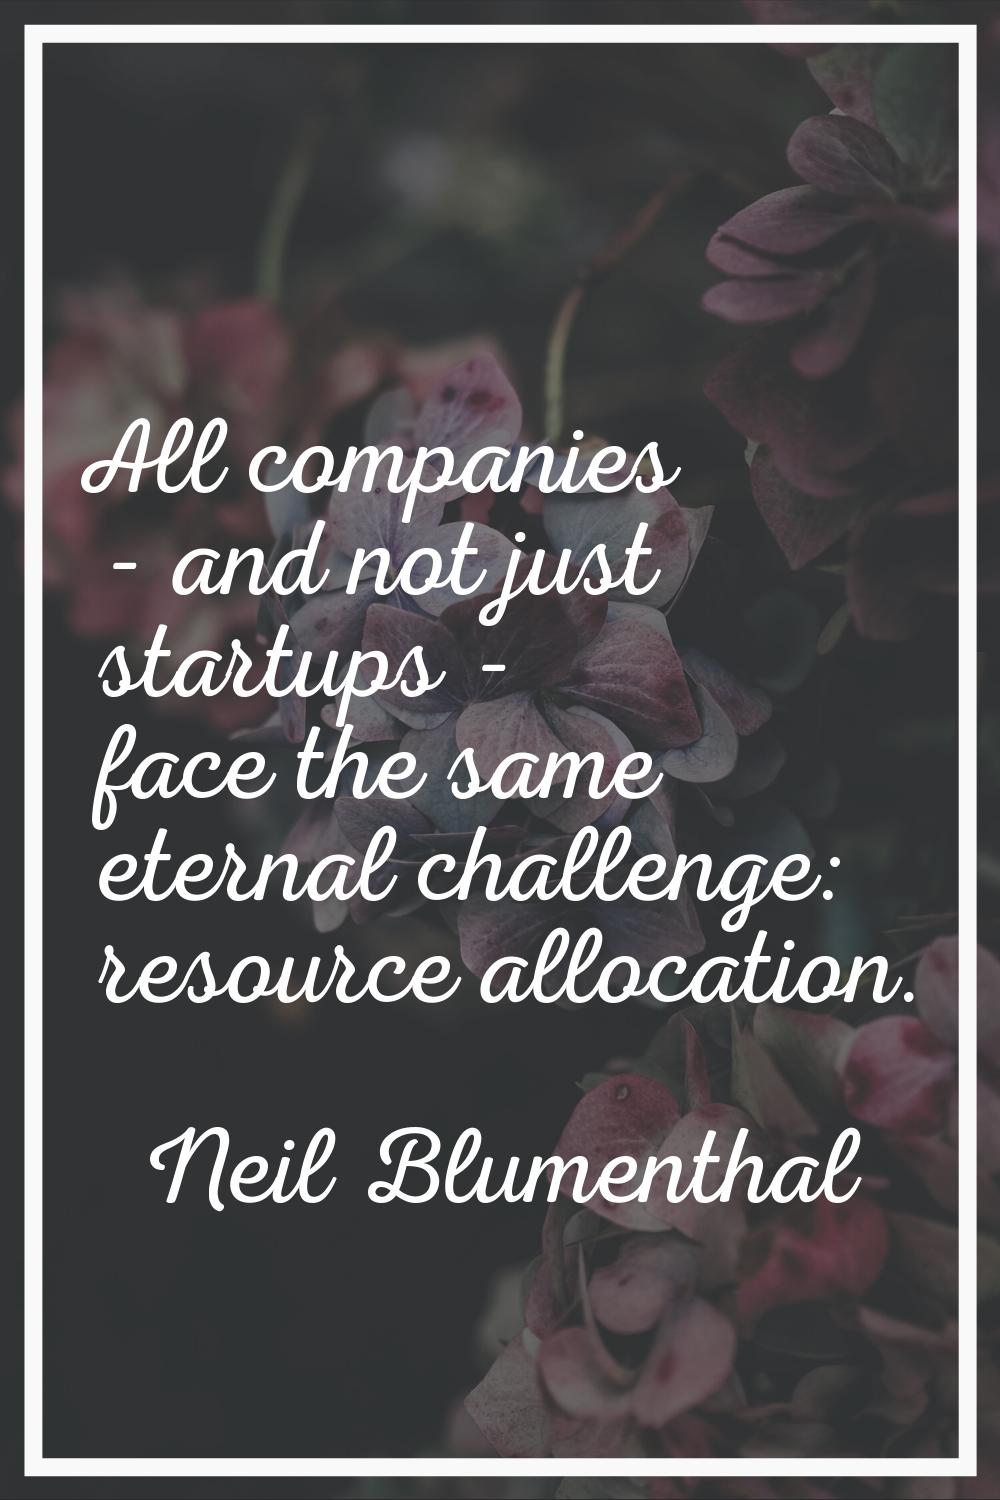 All companies - and not just startups - face the same eternal challenge: resource allocation.